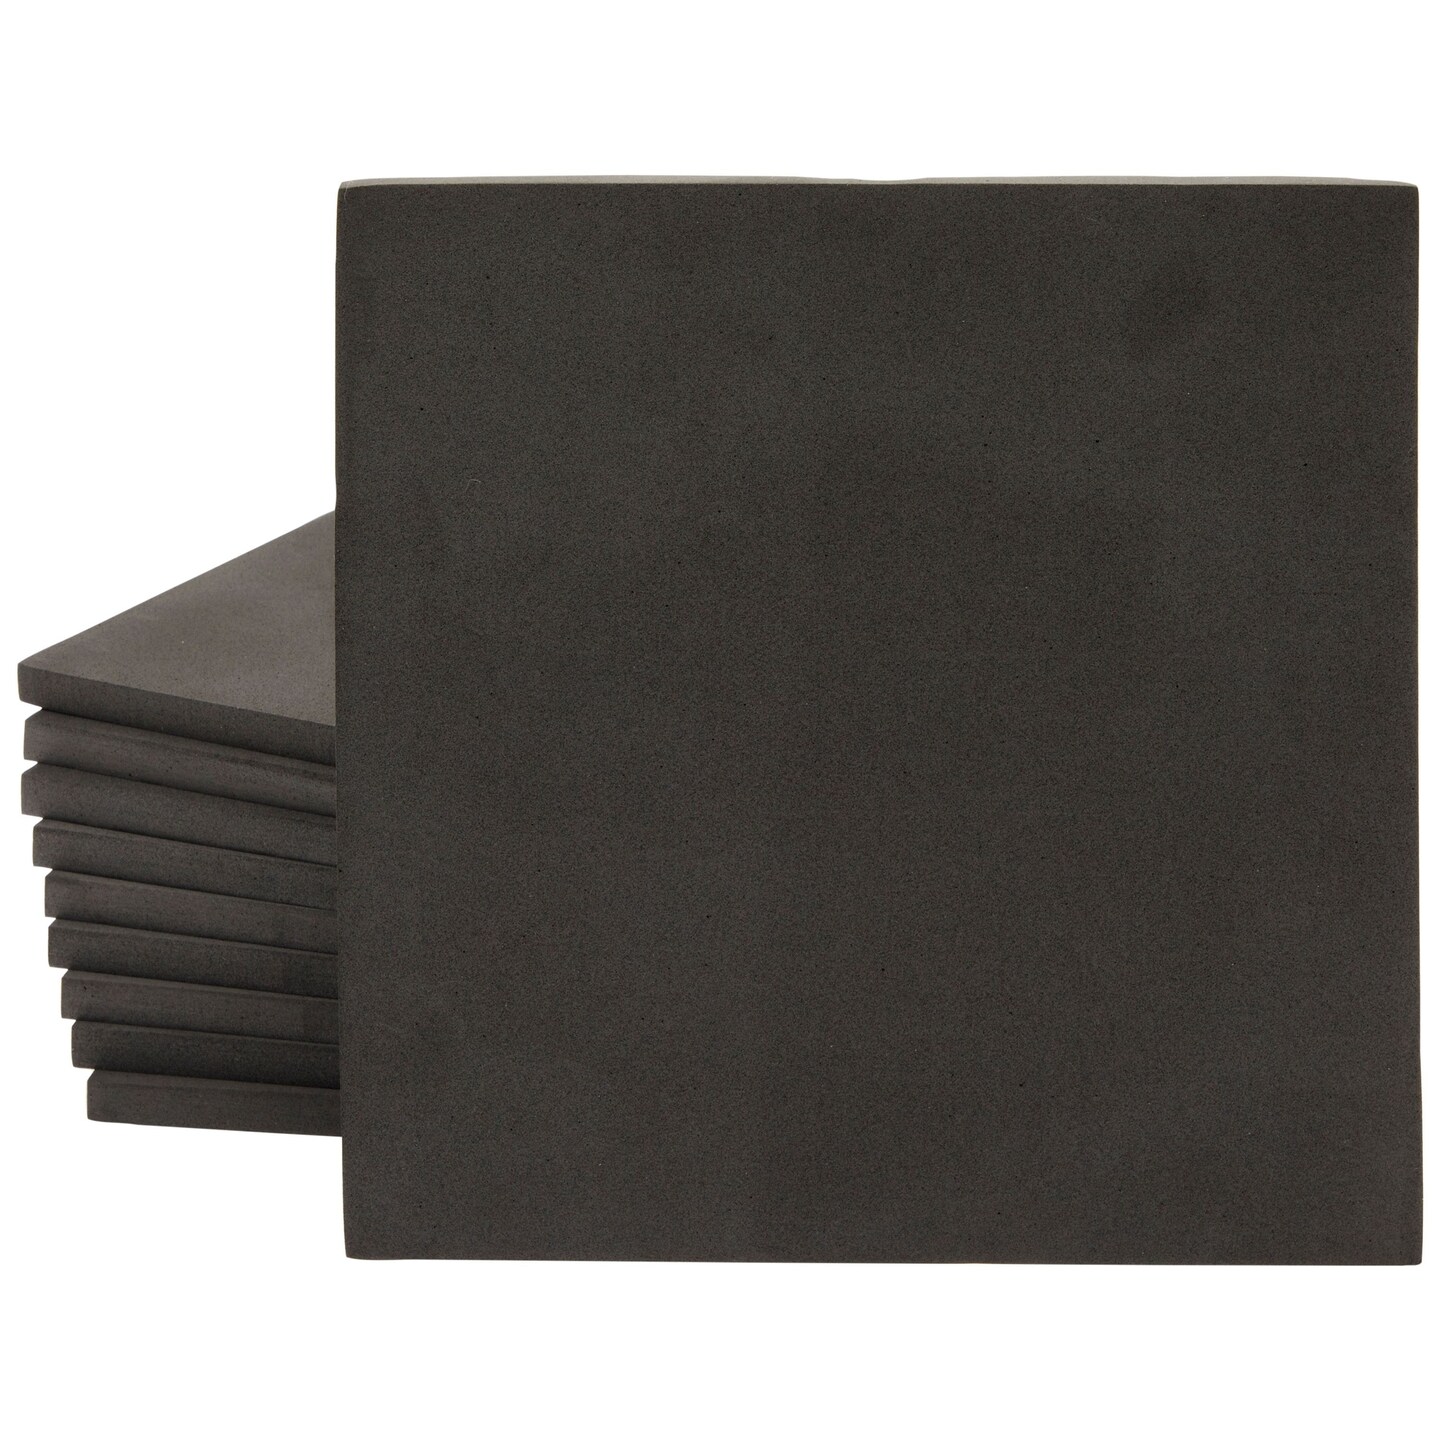 10 Pack 10mm Black EVA Foam Sheets for DIY Projects, Crafts, Cosplay Costumes, 56g/cm&#xB3; Density (9.6 x 9.6 In)